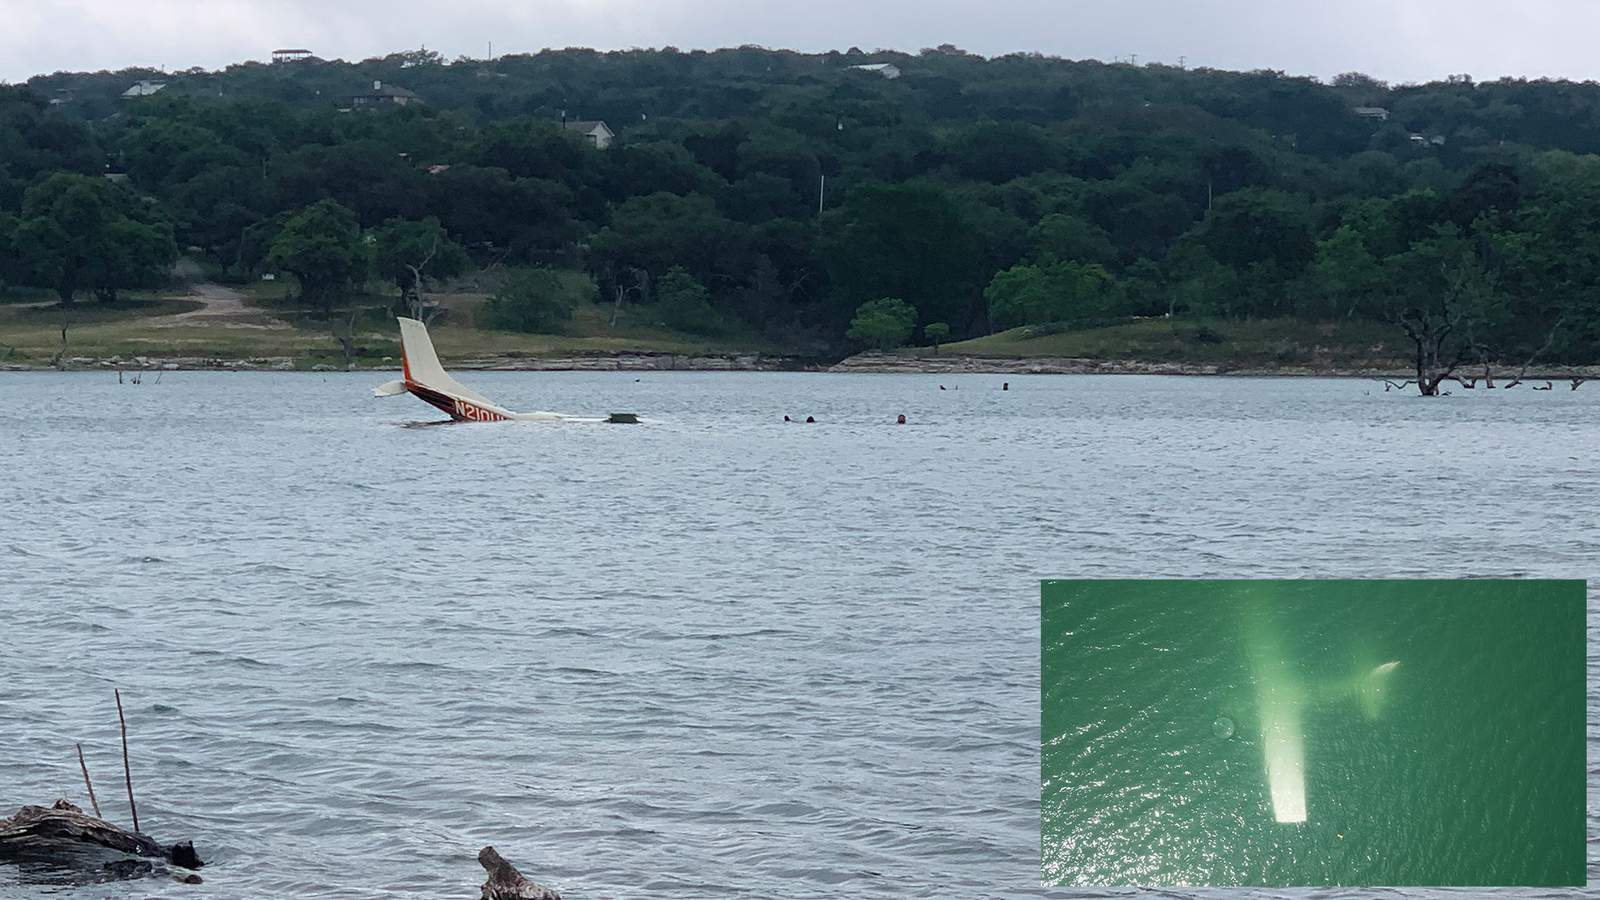 ’I thought for sure they were dead:’ Man recounts helping passengers to shore after emergency plane landing in Canyon Lake